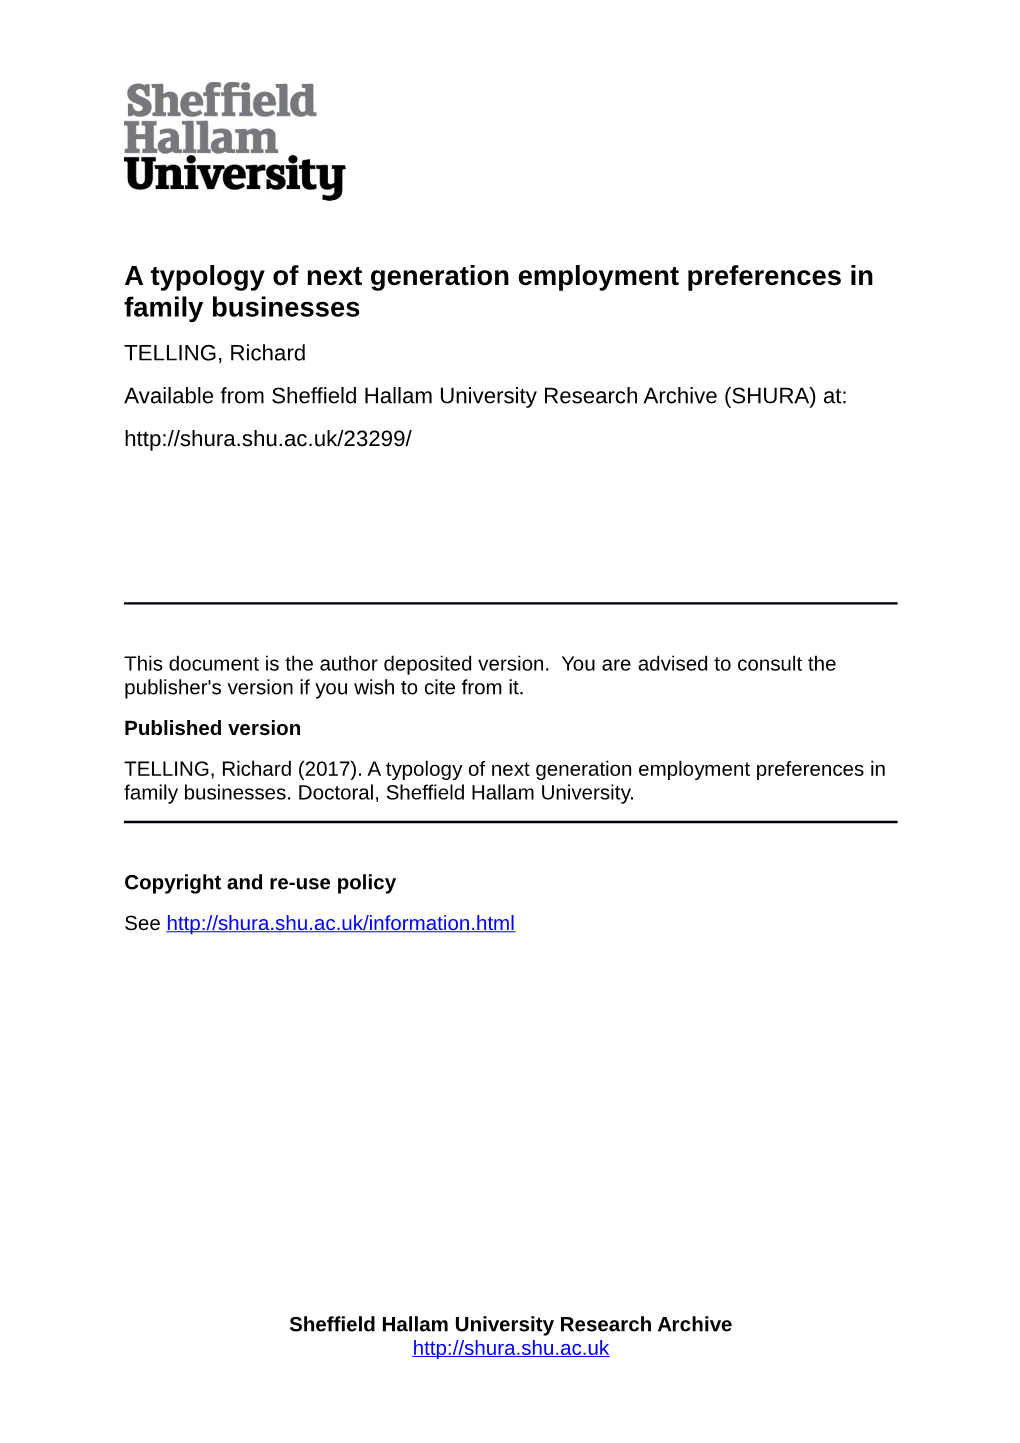 A Typology of Next Generation Employment Preferences in Family